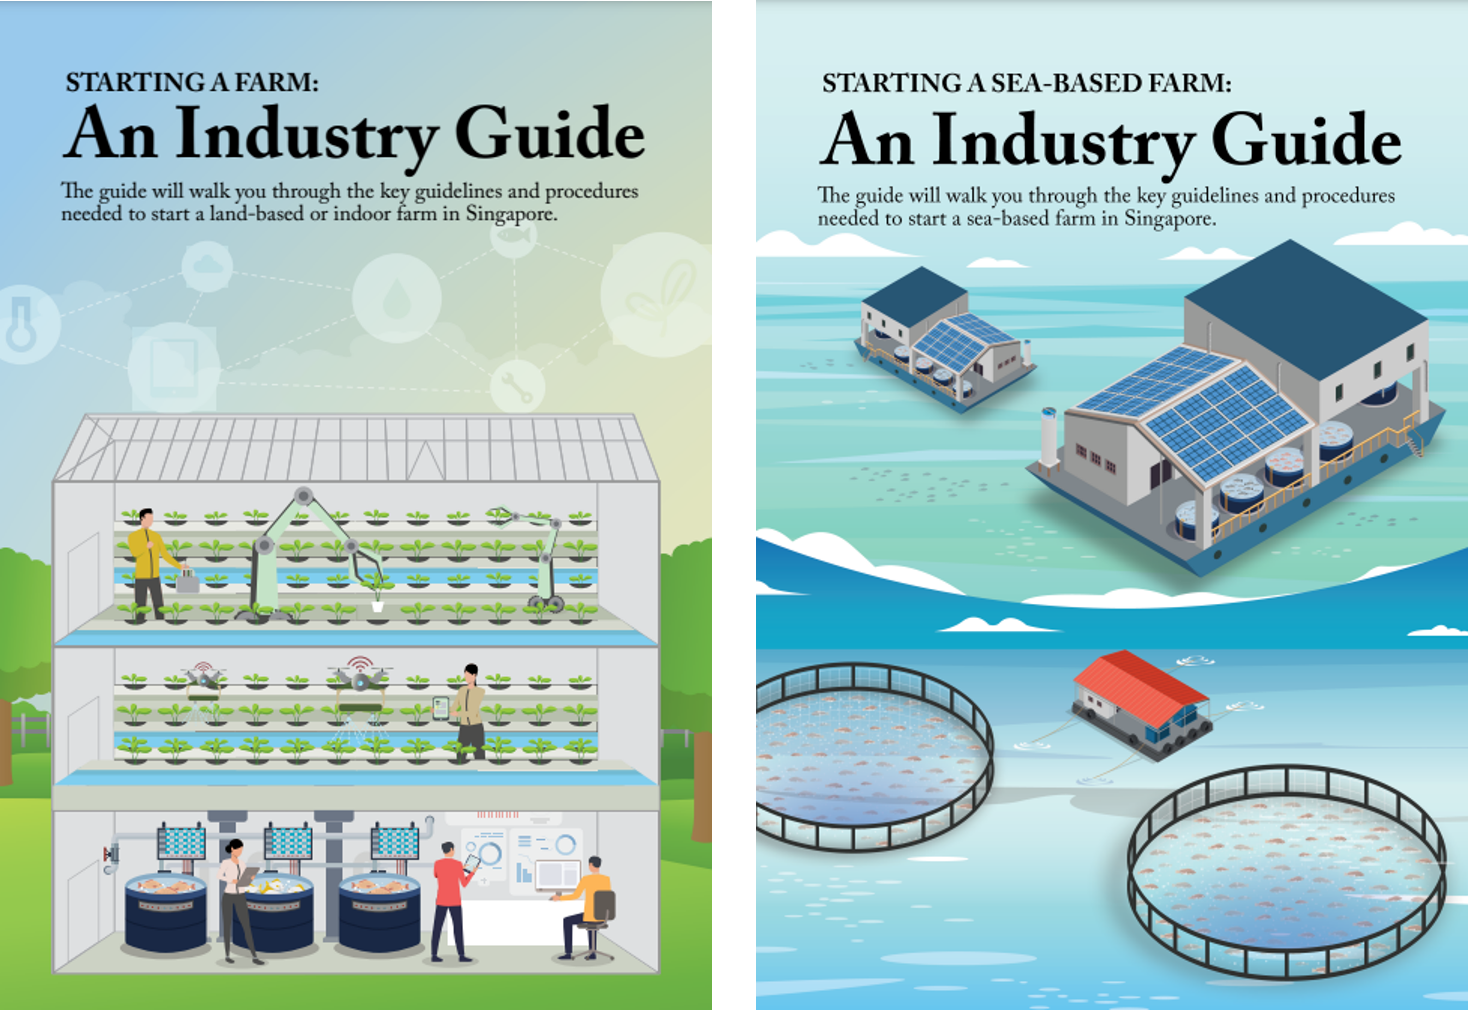 SFA industry guides for farms